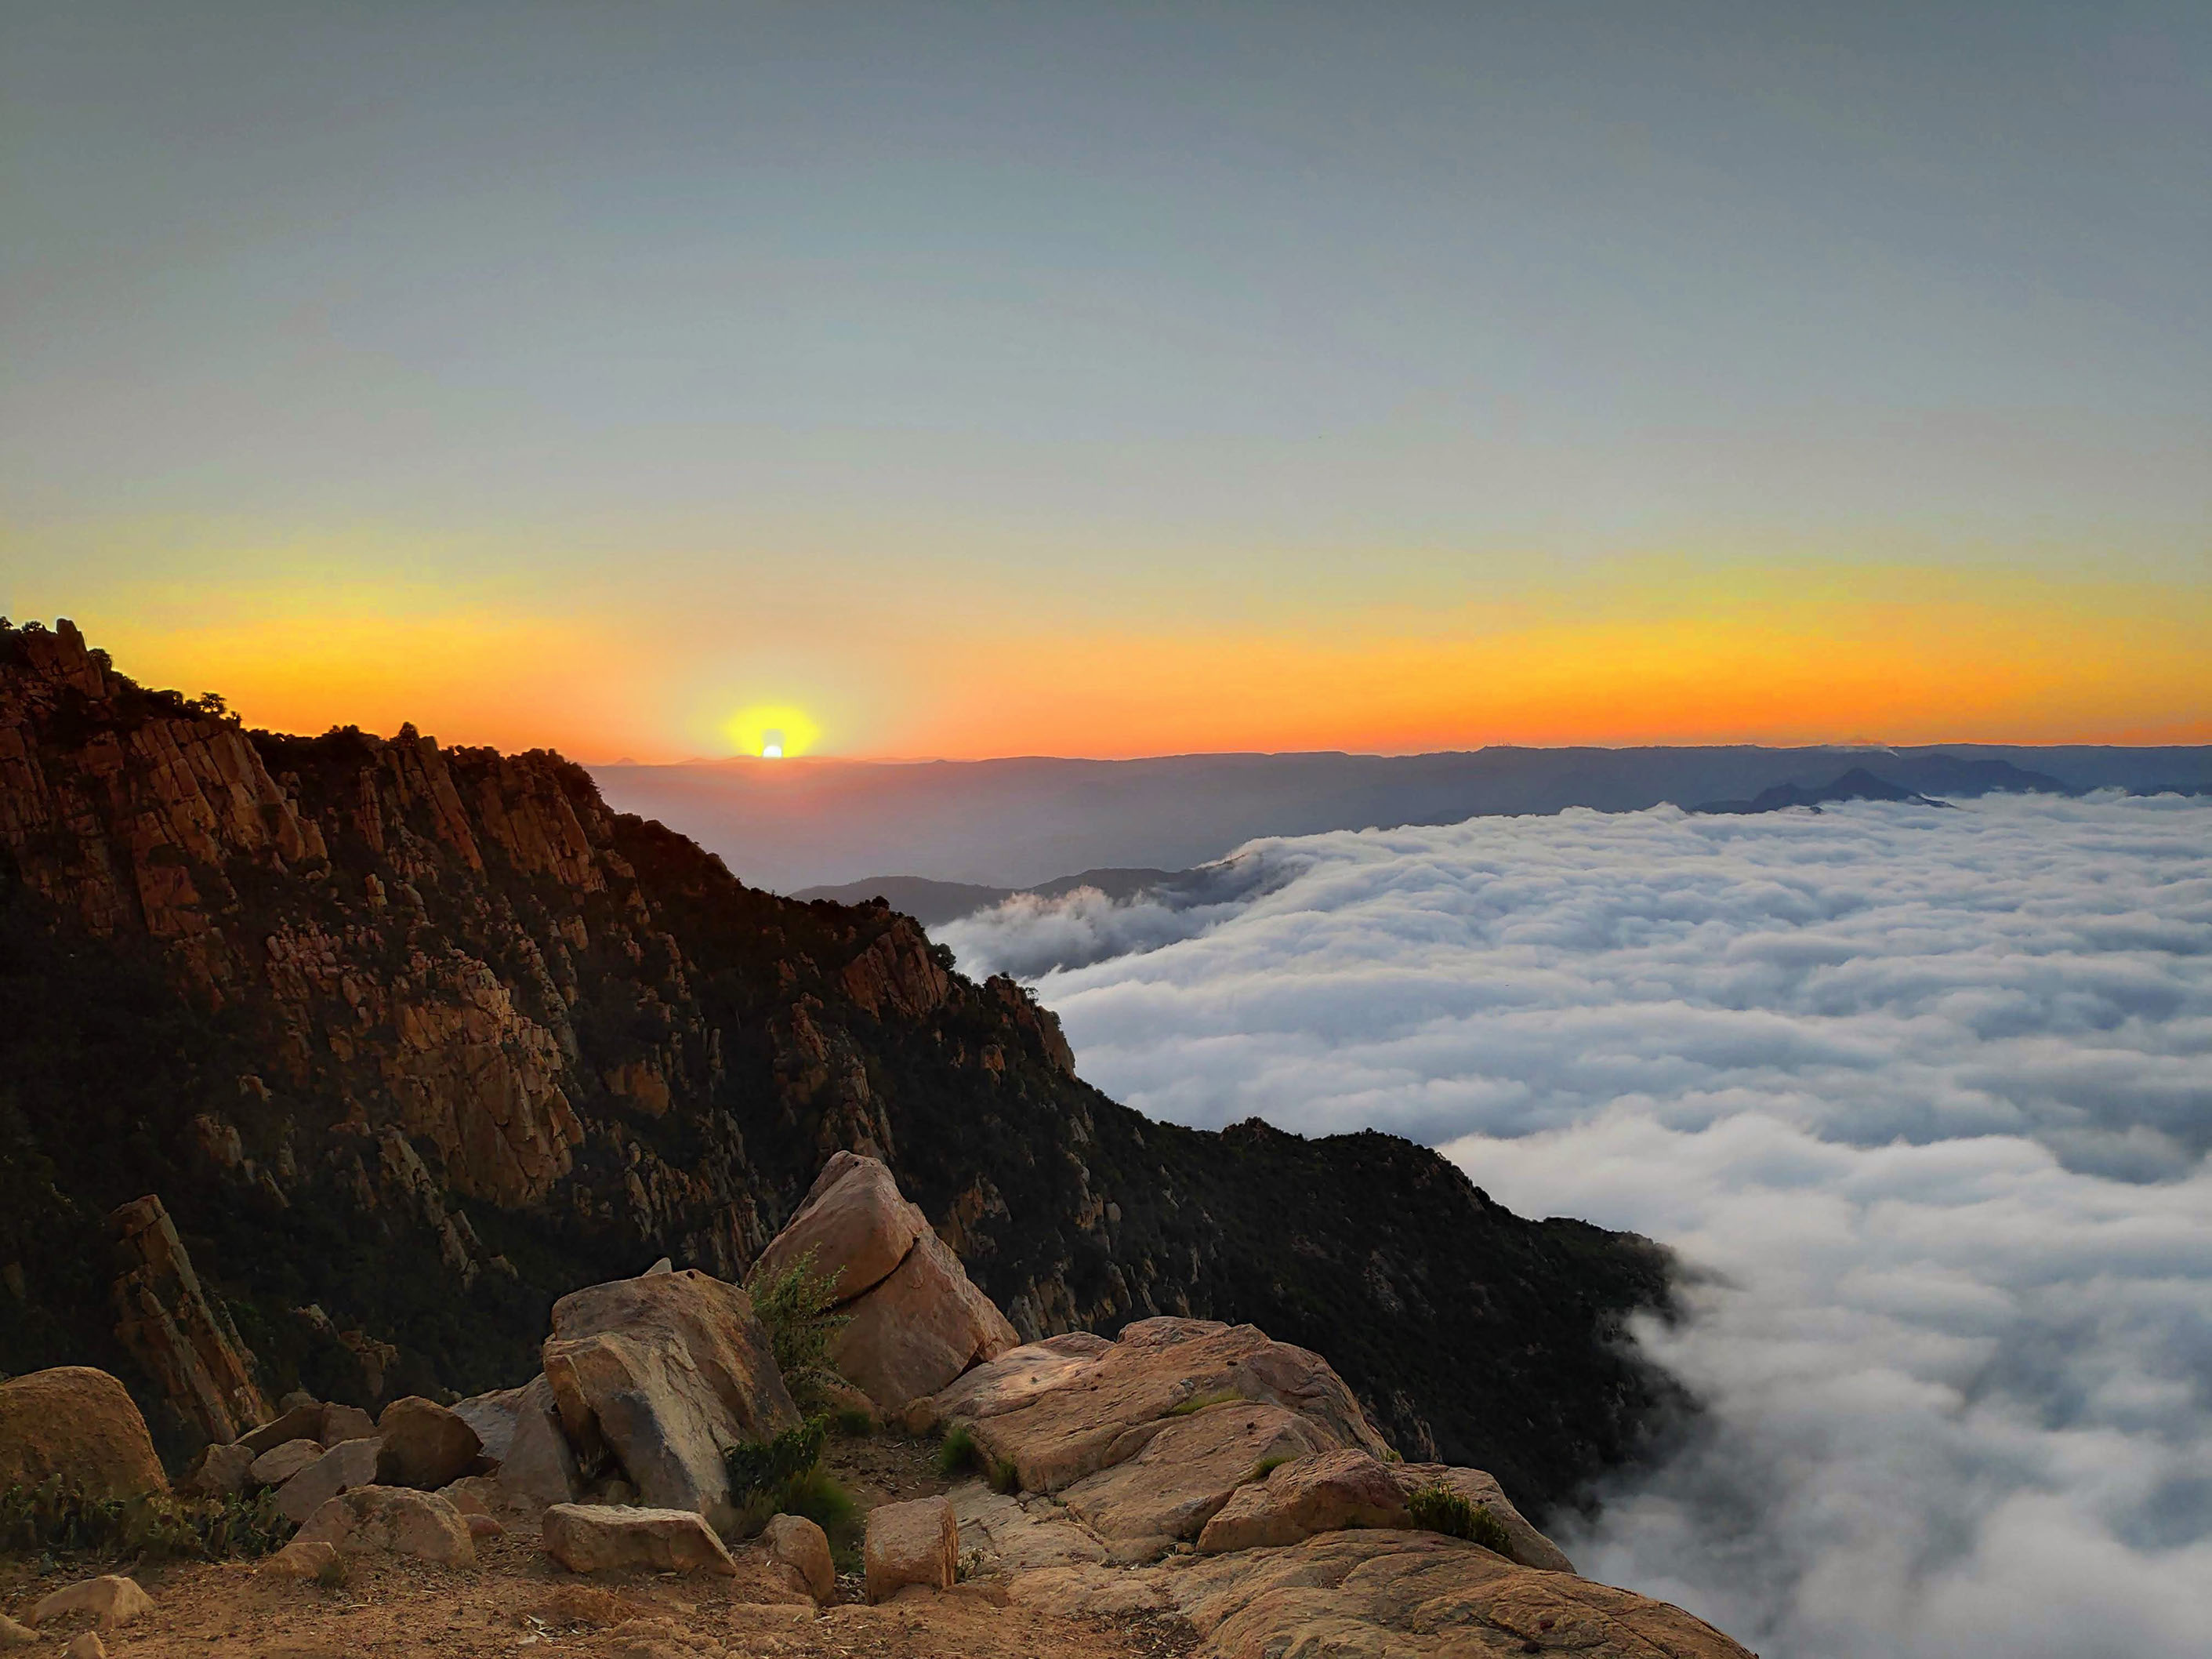 Sunset dipping into thick clouds below at 11,500 feet at Debre Bizen monastery in Eritrea